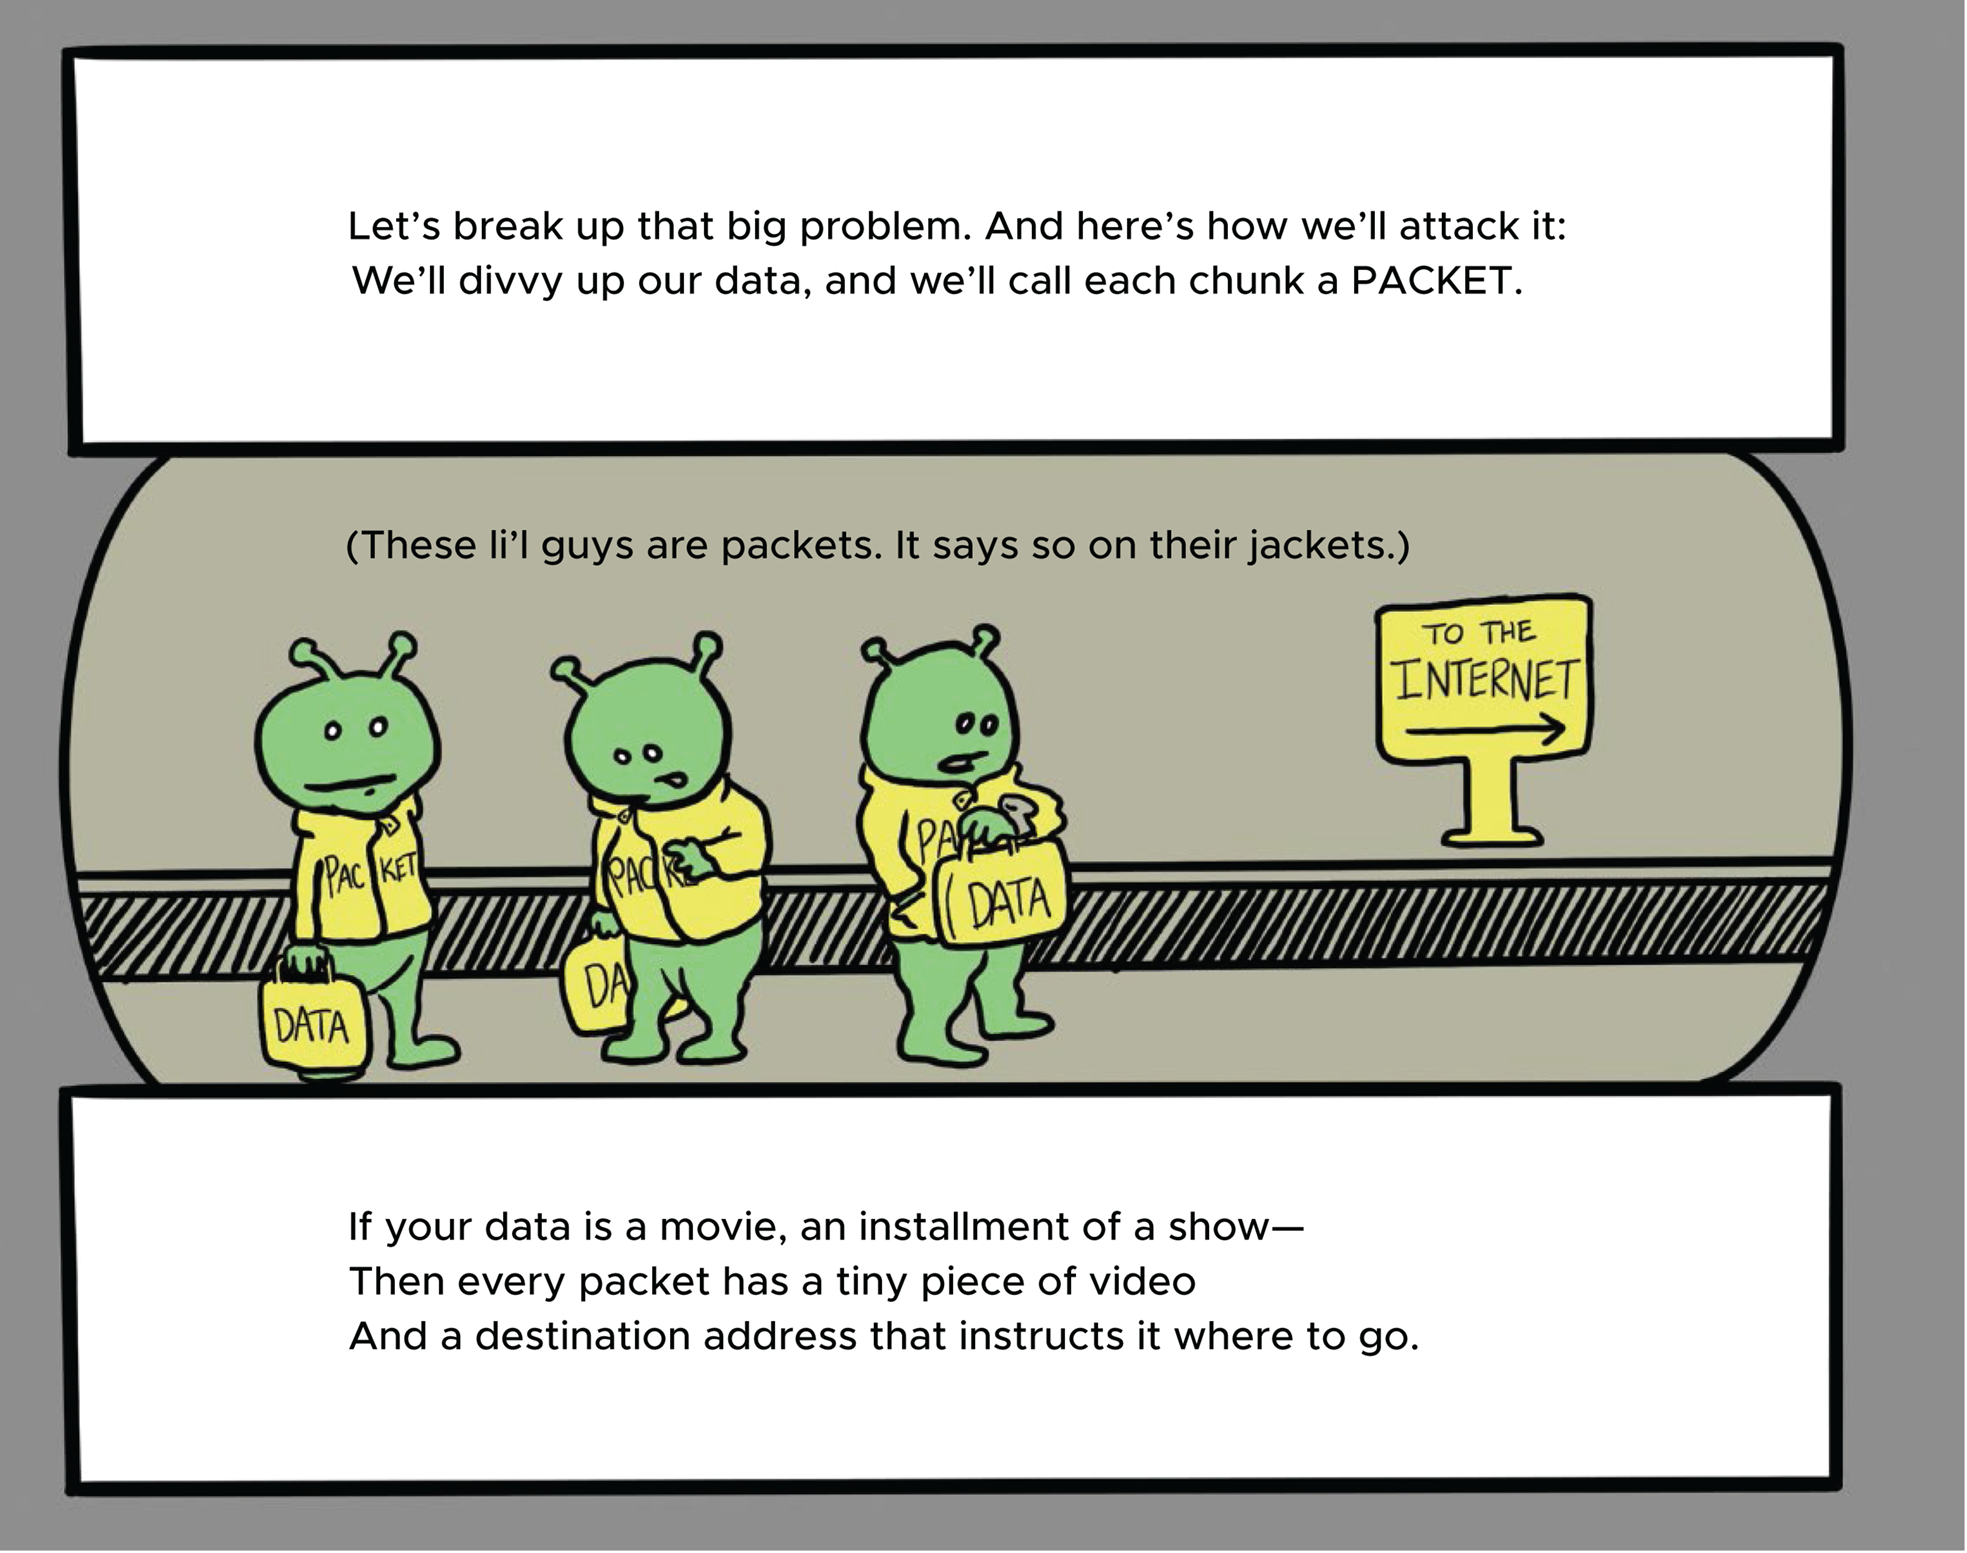 Cartoon illustration of three animated characters holding data and they are about to travel to the internet.